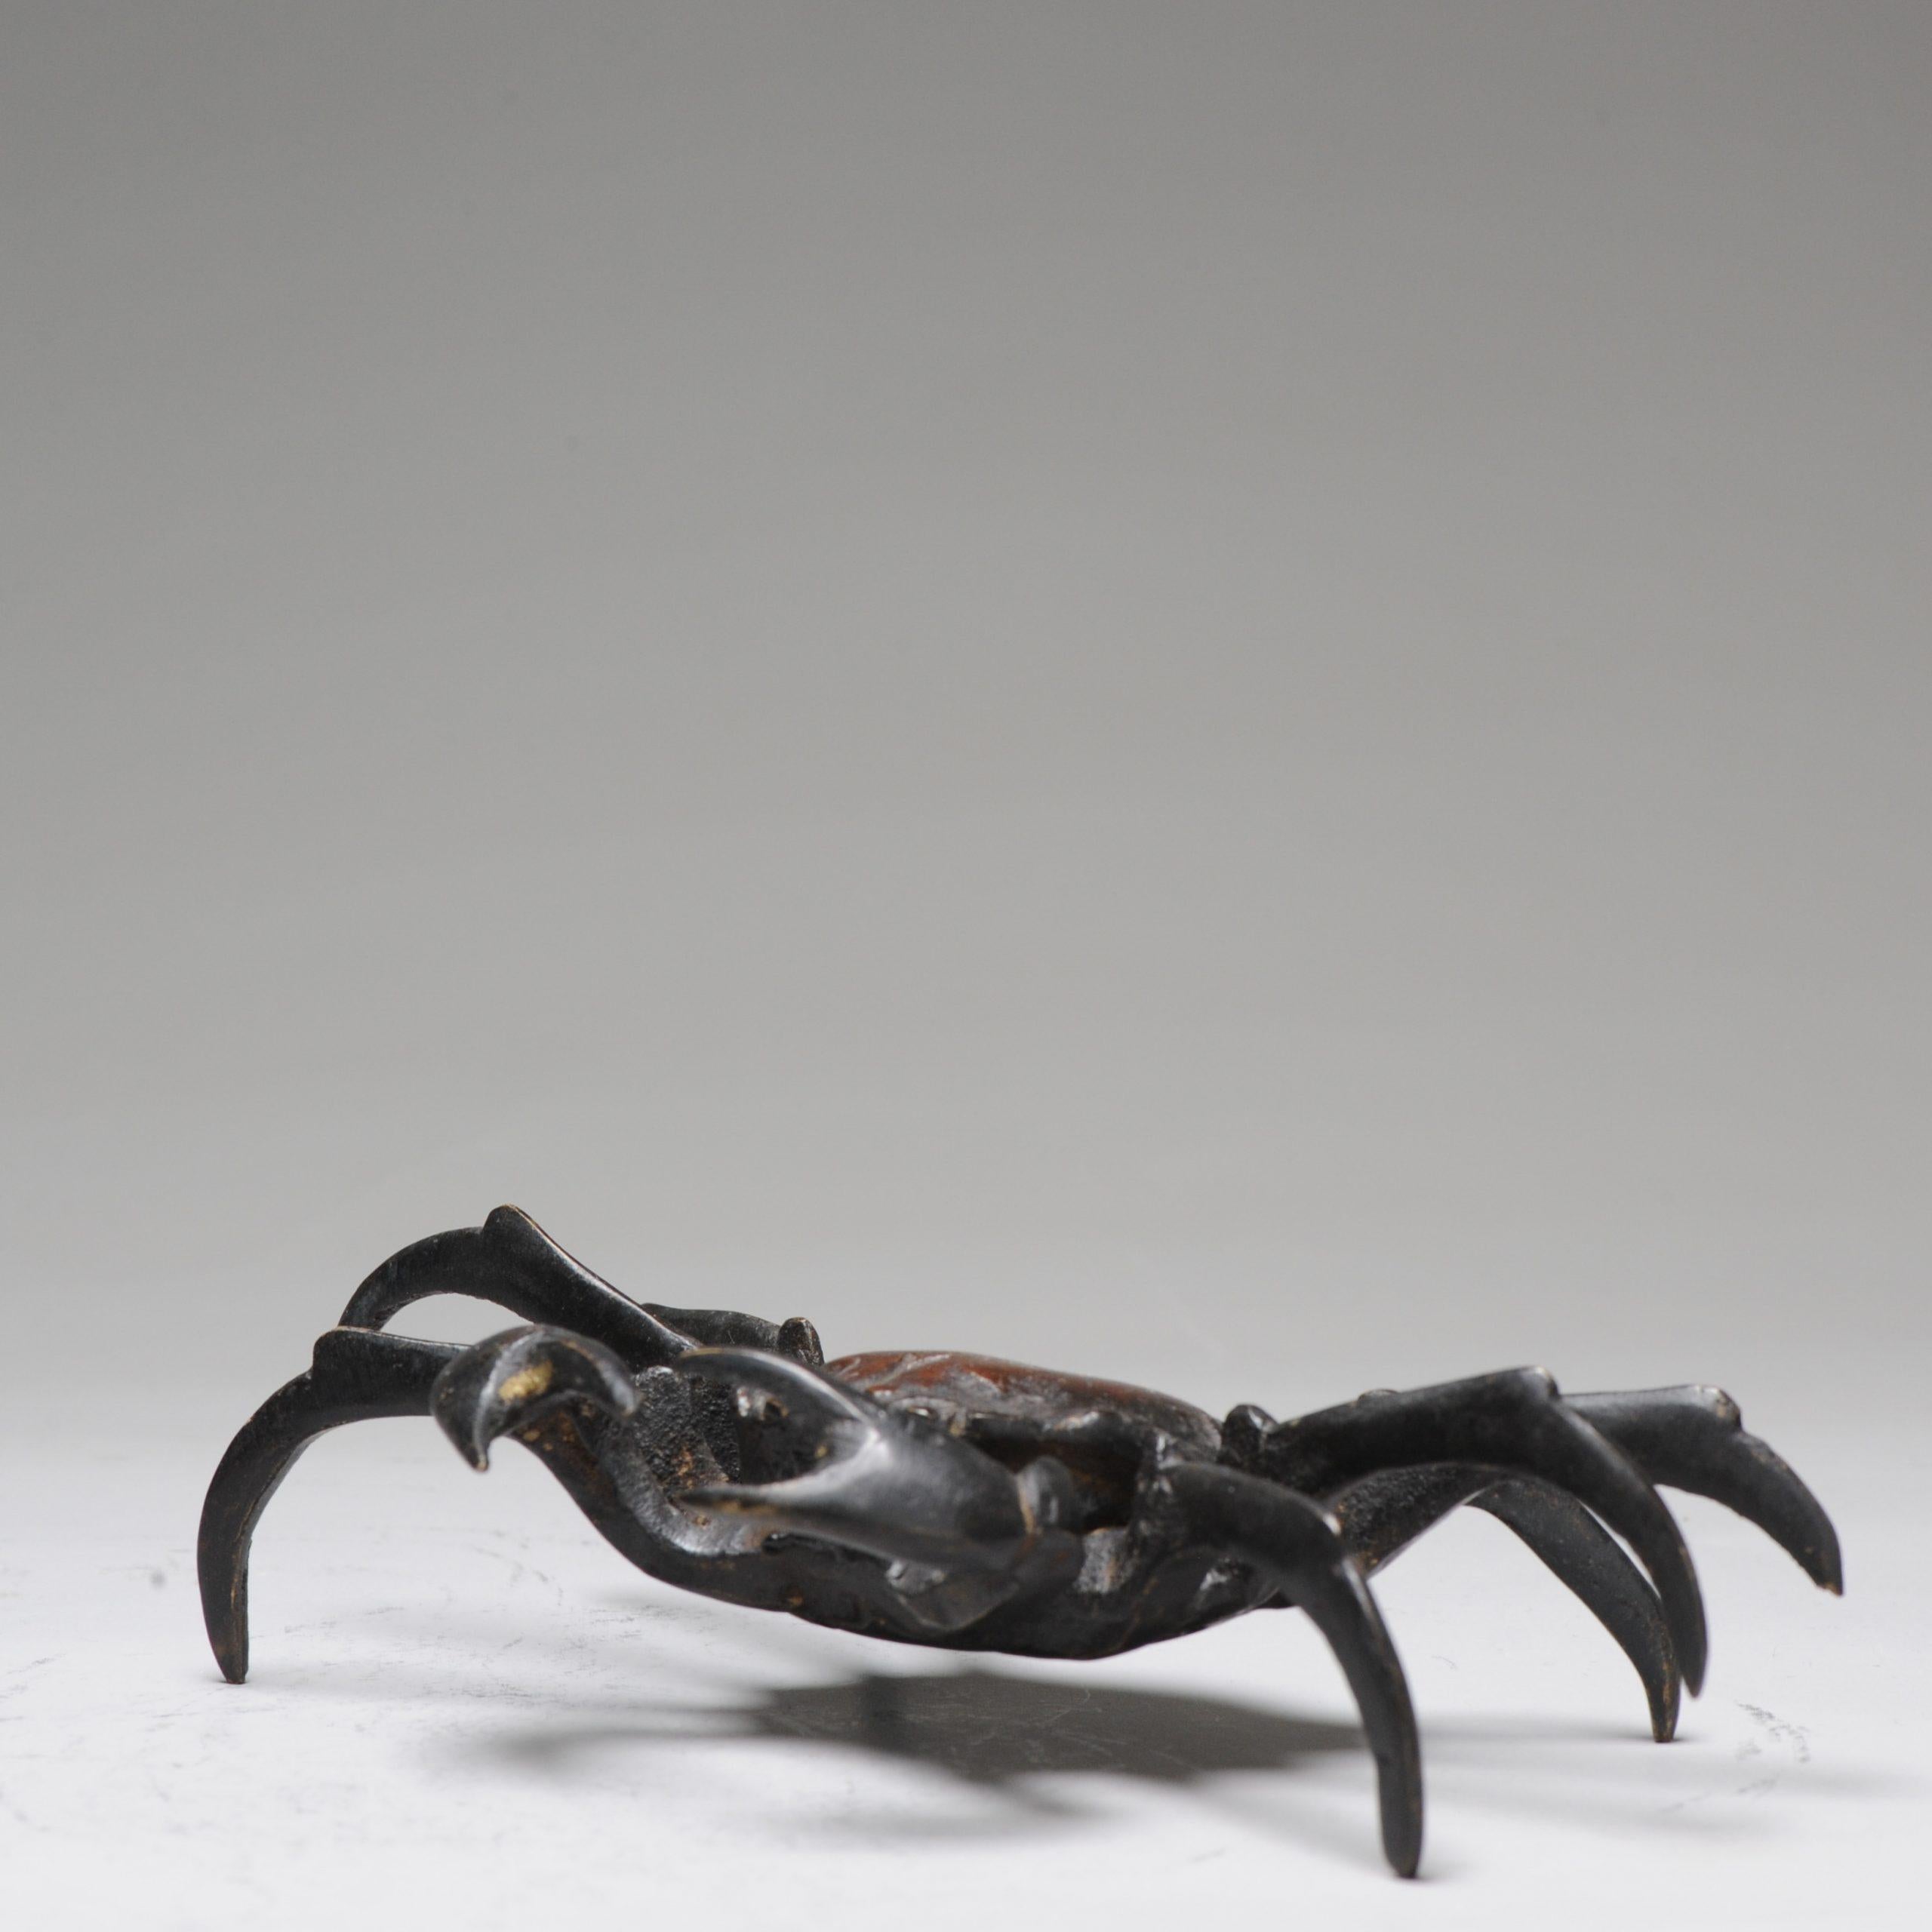 Antique Okimono Bronze Japanese Statue of a Crab 19th C Meiji Japan In Good Condition For Sale In Amsterdam, Noord Holland